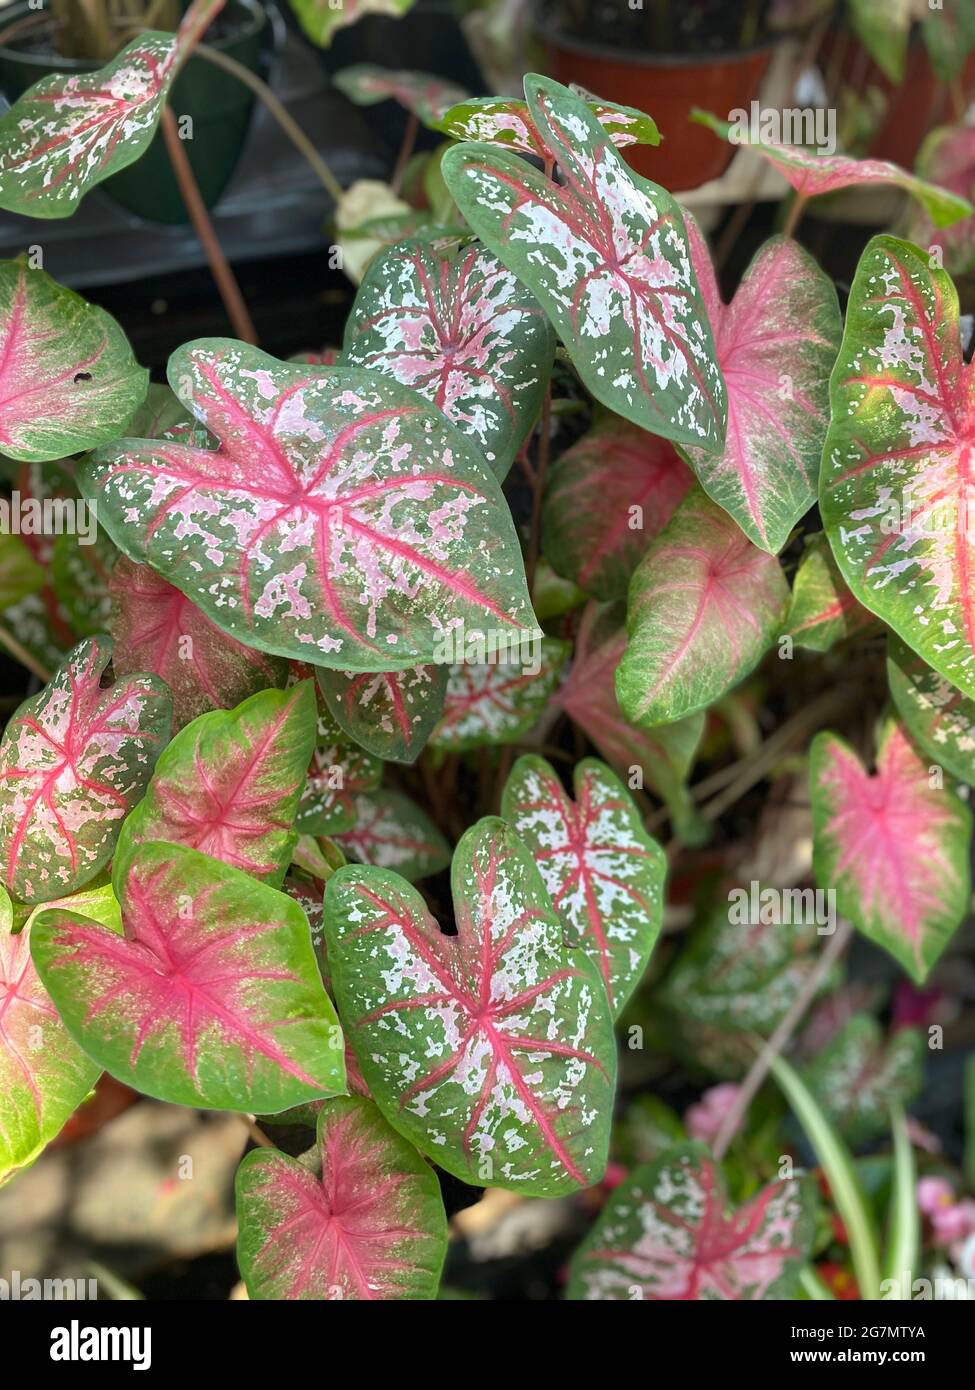 Caladium, a tropical South American plant of the arum family, which is cultivated for its brilliantly colored ornamental foliage.Caladium /kəˈleɪdiəm/[2] is a genus of flowering plants in the family Araceae. They are often known by the common name elephant ear . Stock Photo